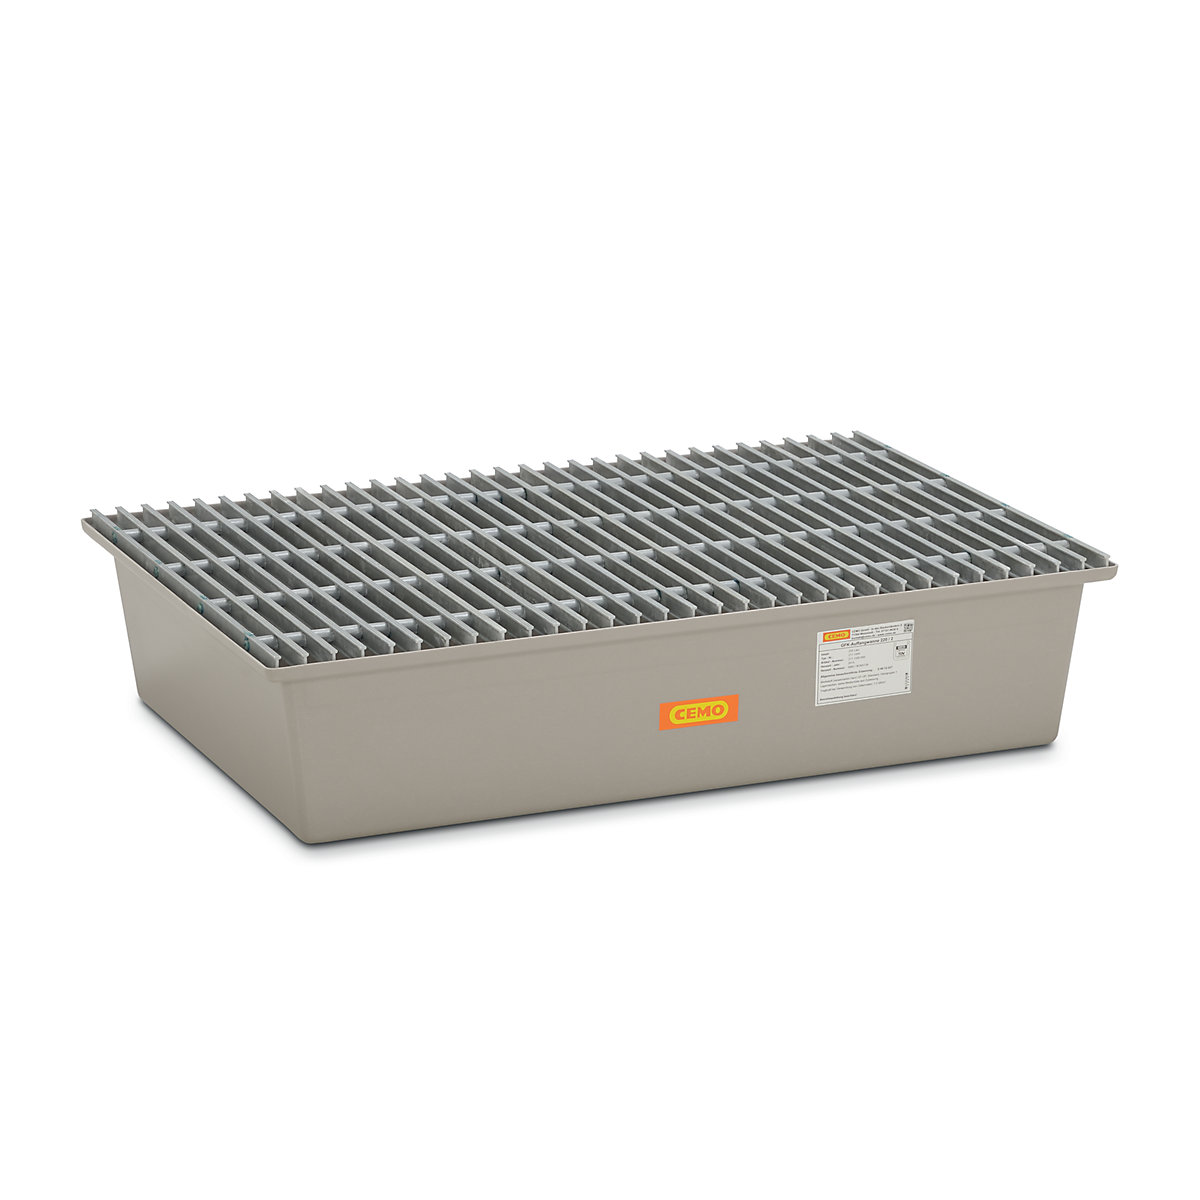 GRP base sump tray – CEMO, 2 x 200 litre drums, with certification, with GRP grate-4